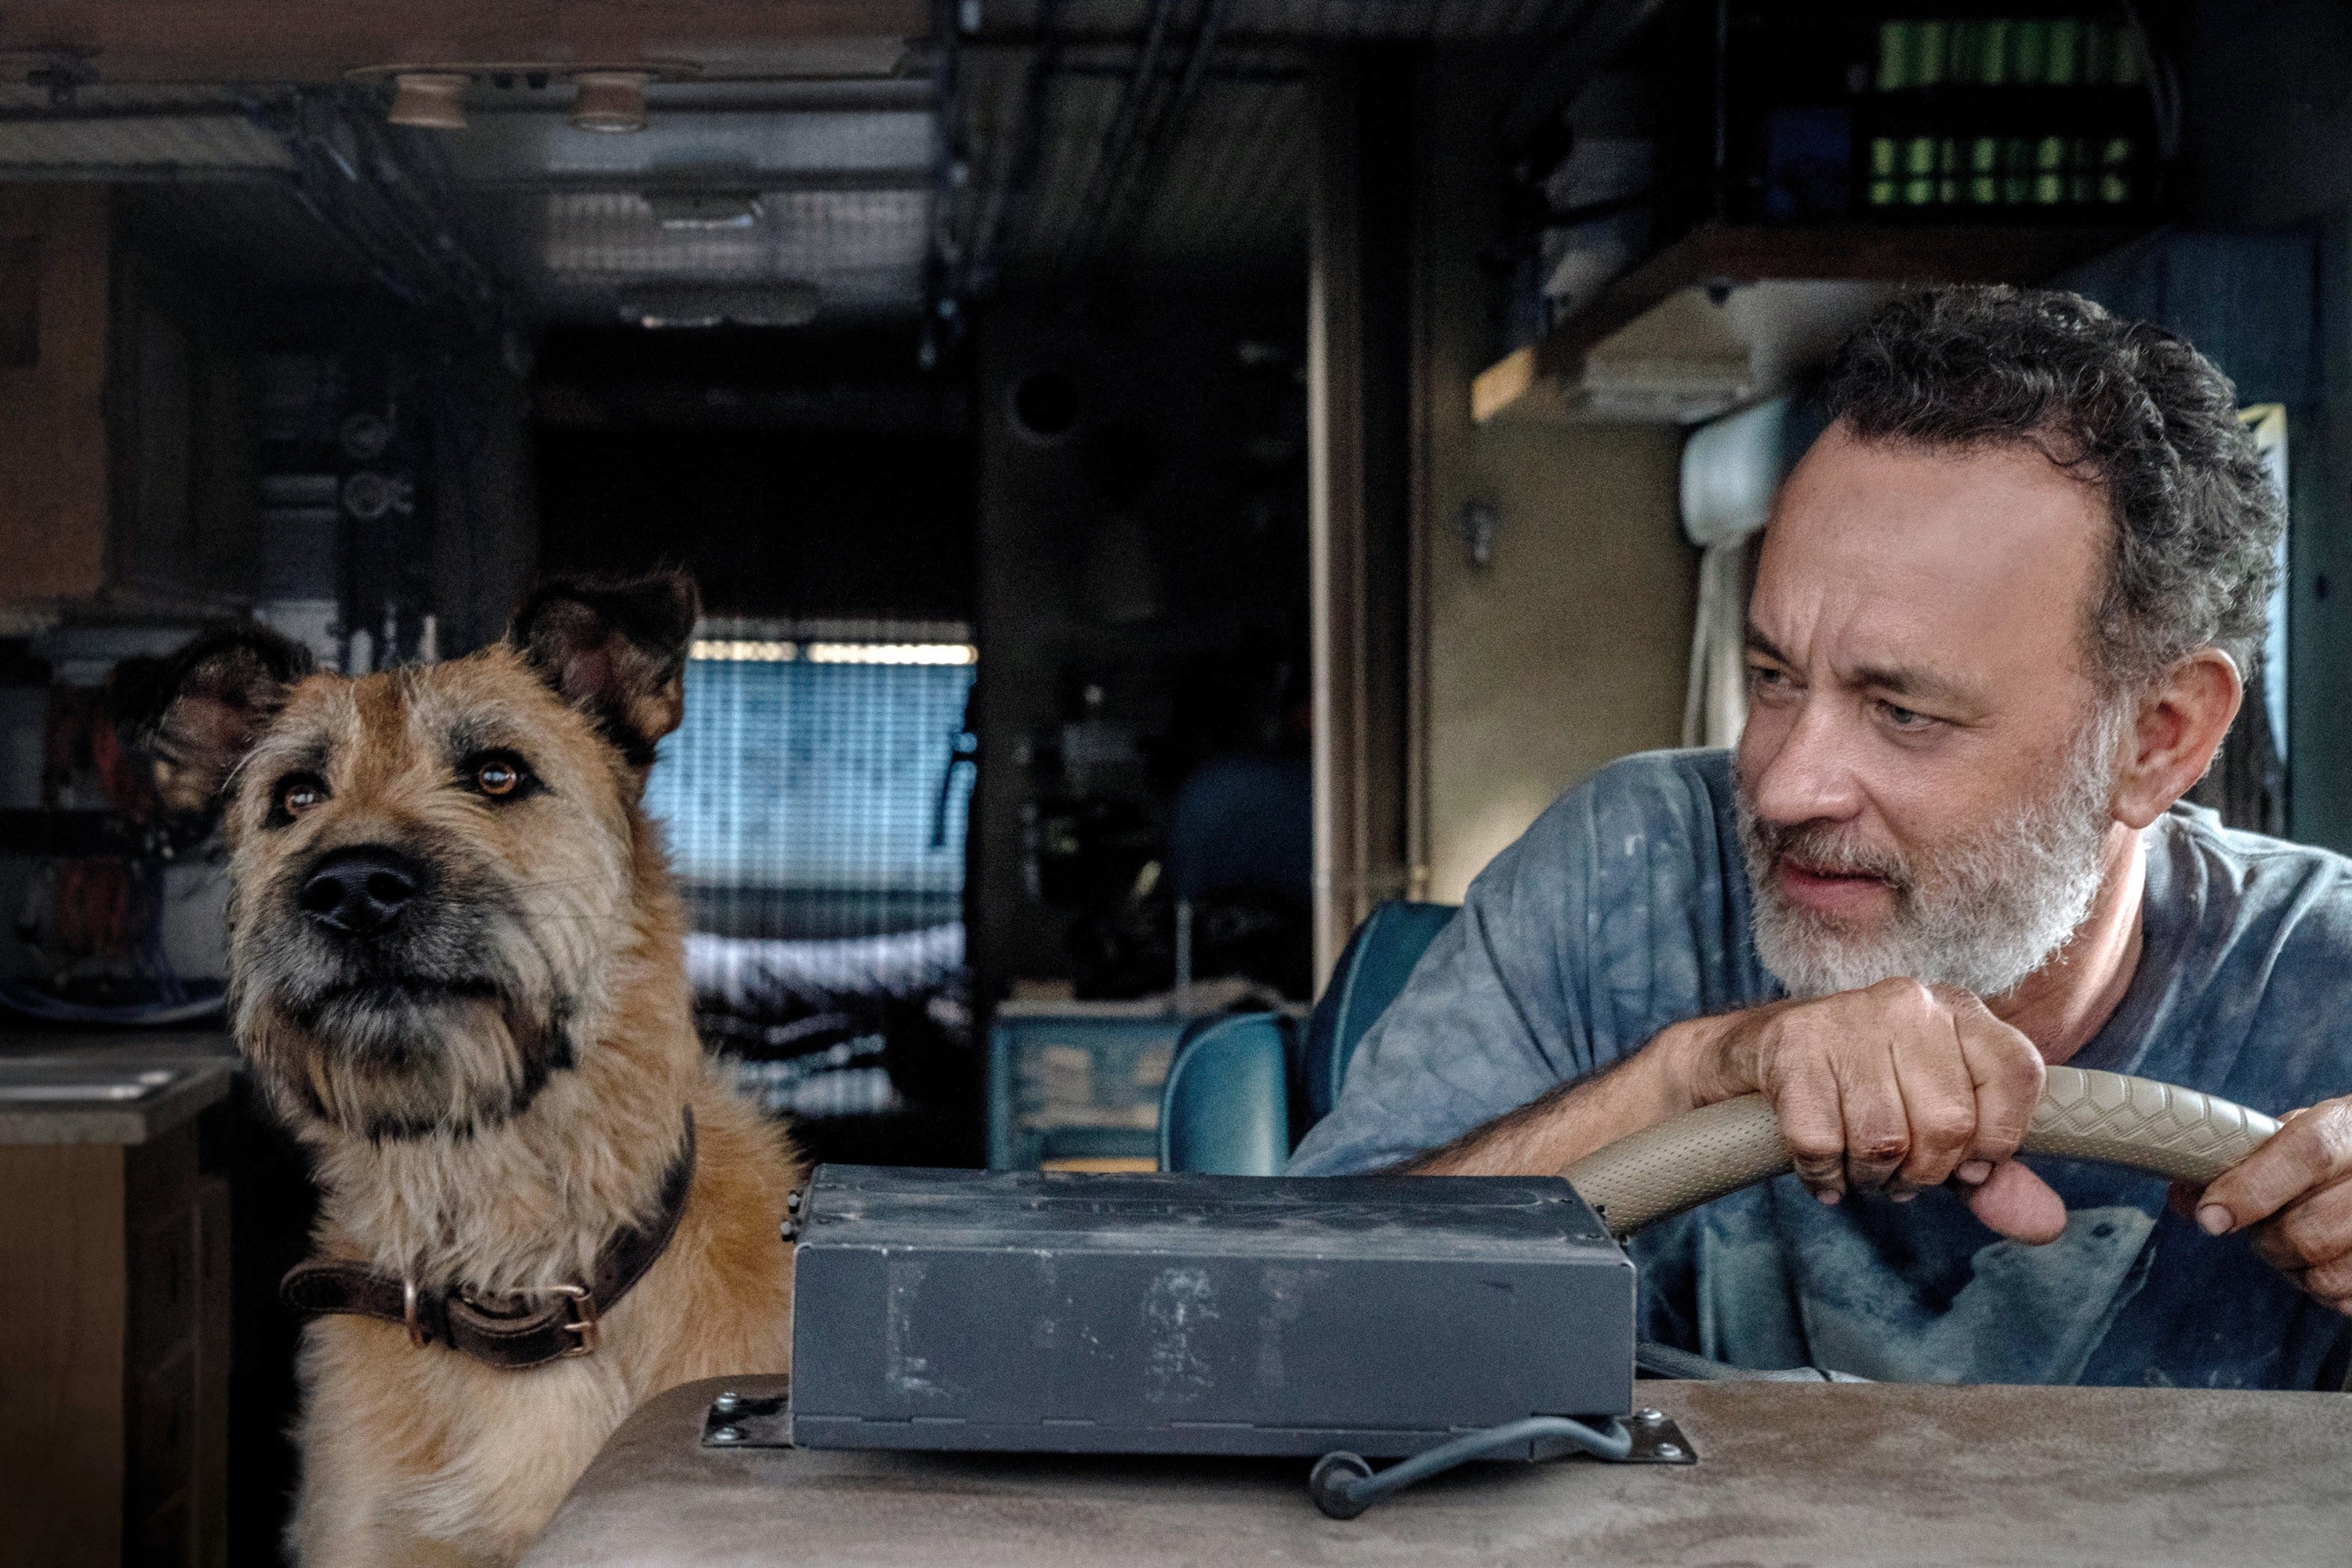 Tom Hanks sits in an RV with his dog